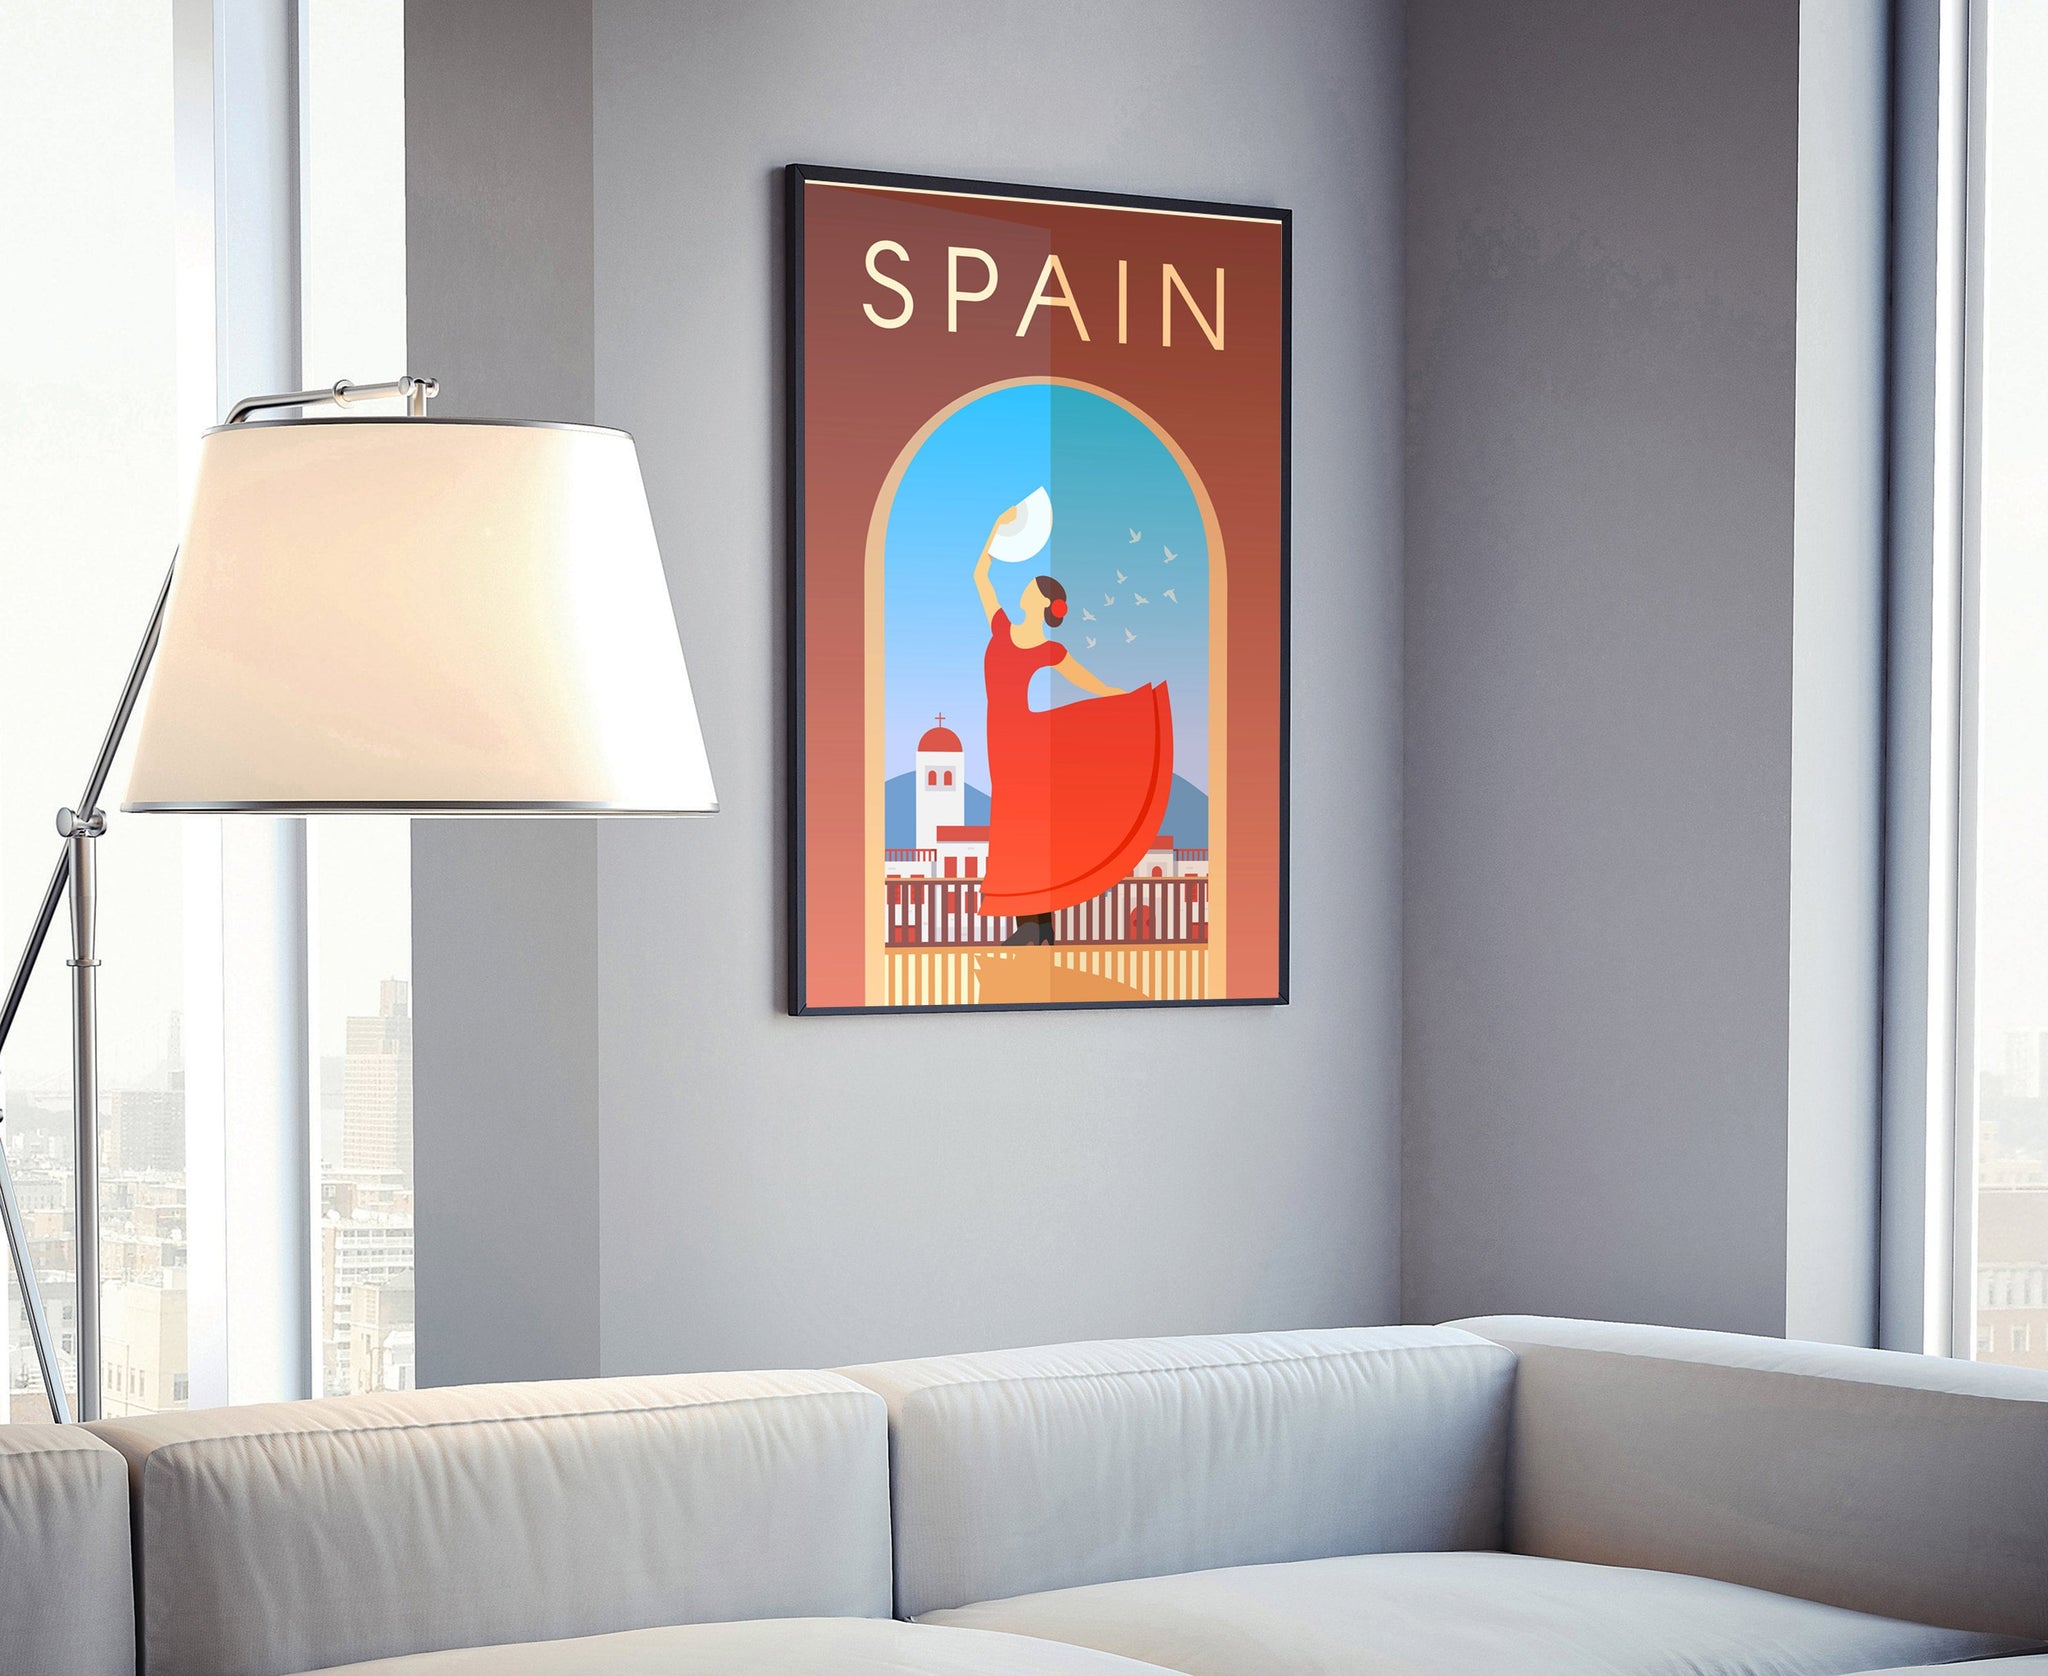 SPAIN travel poster, Spain cityscape poster, Spain landmark poster wall art, Home wall art, Office wall decoration, Birthday gift